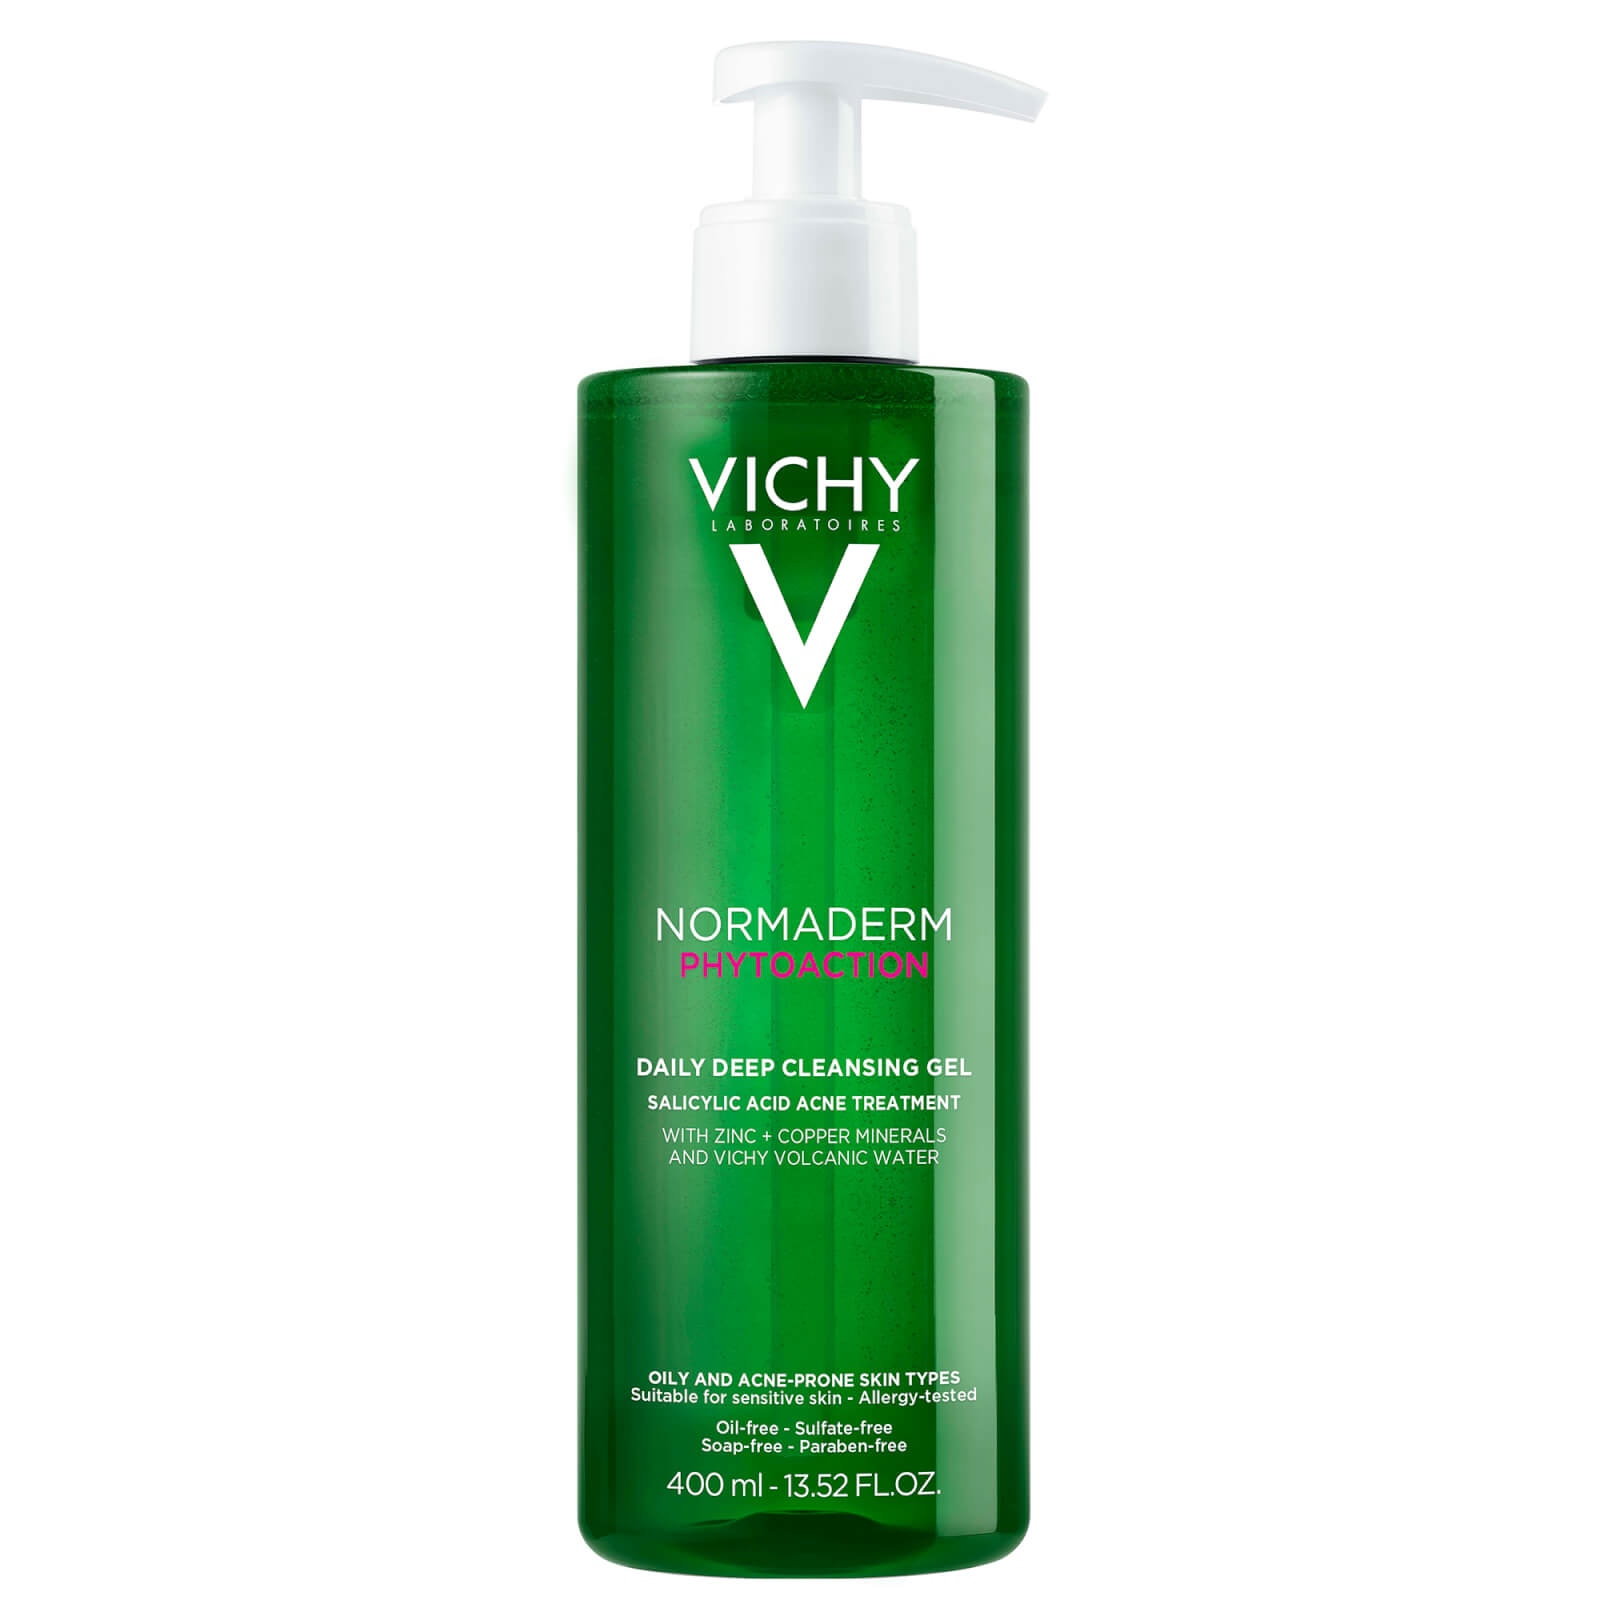  Normaderm PhytoAction Daily Acne Treatment Face Wash 400ml